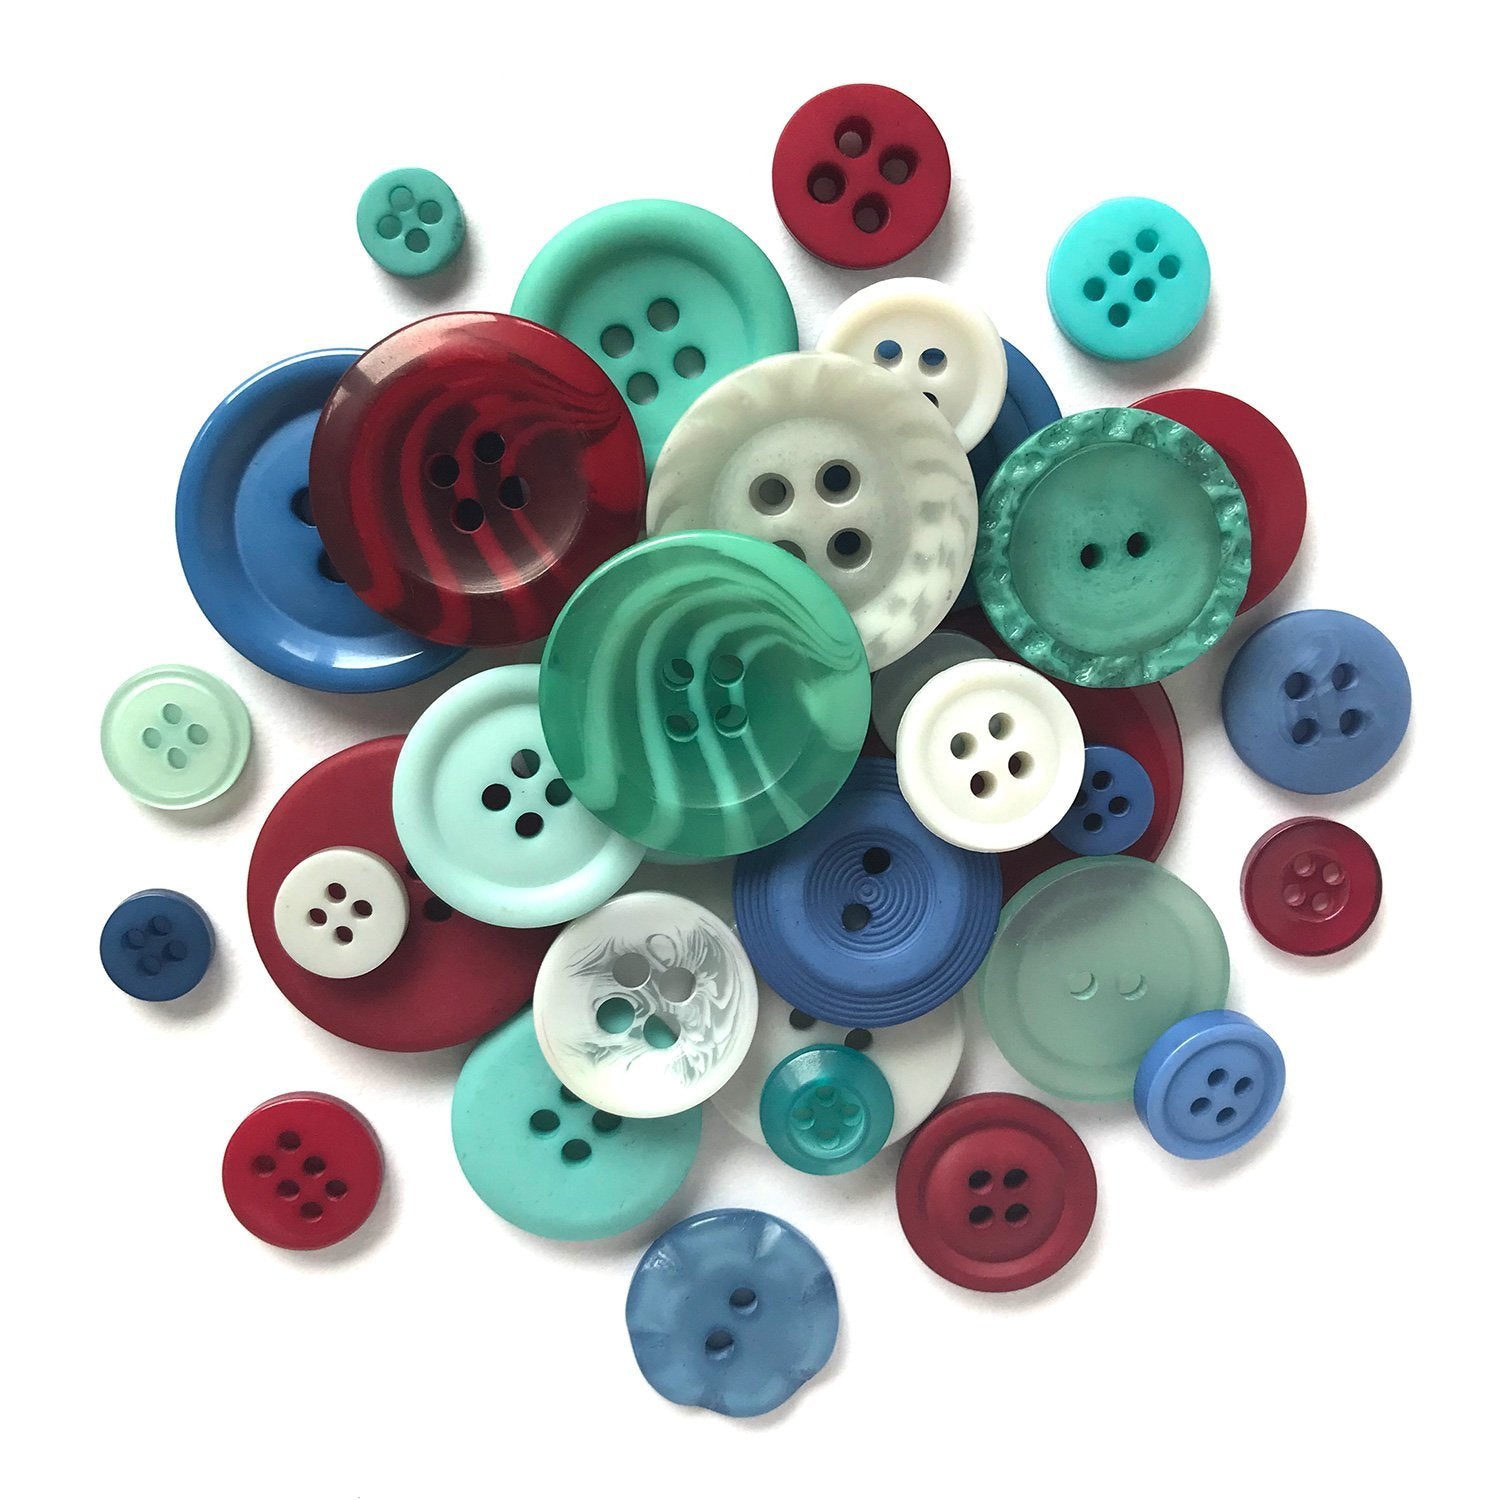 Buttons Galore Tiny Sewing Buttons - Seaside